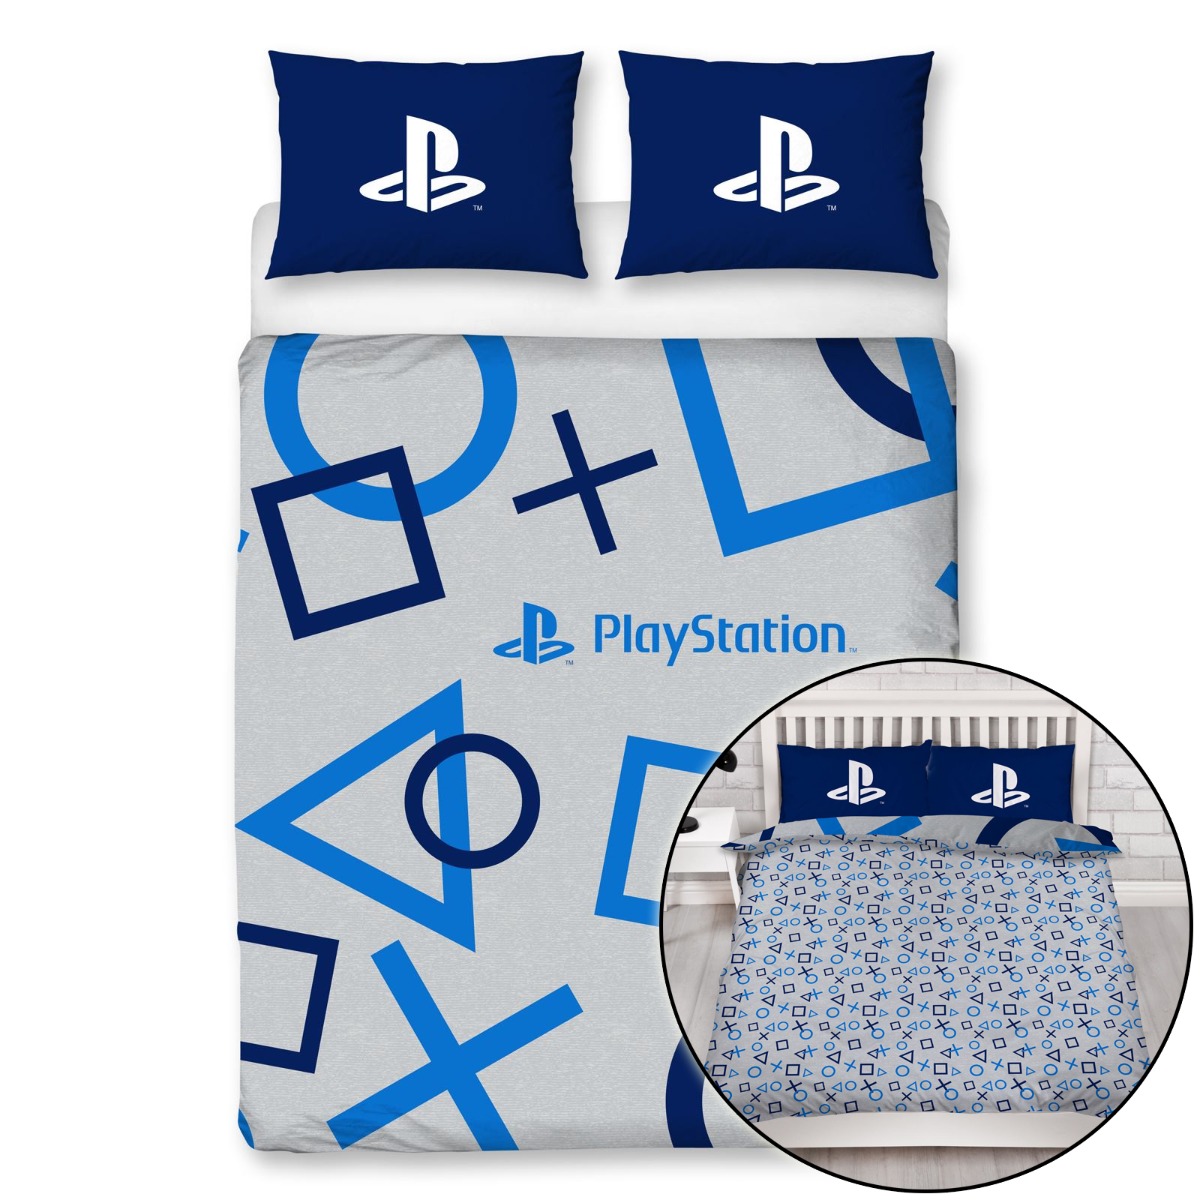 Playstation Blue Duvet Cover and Pillowcase Set